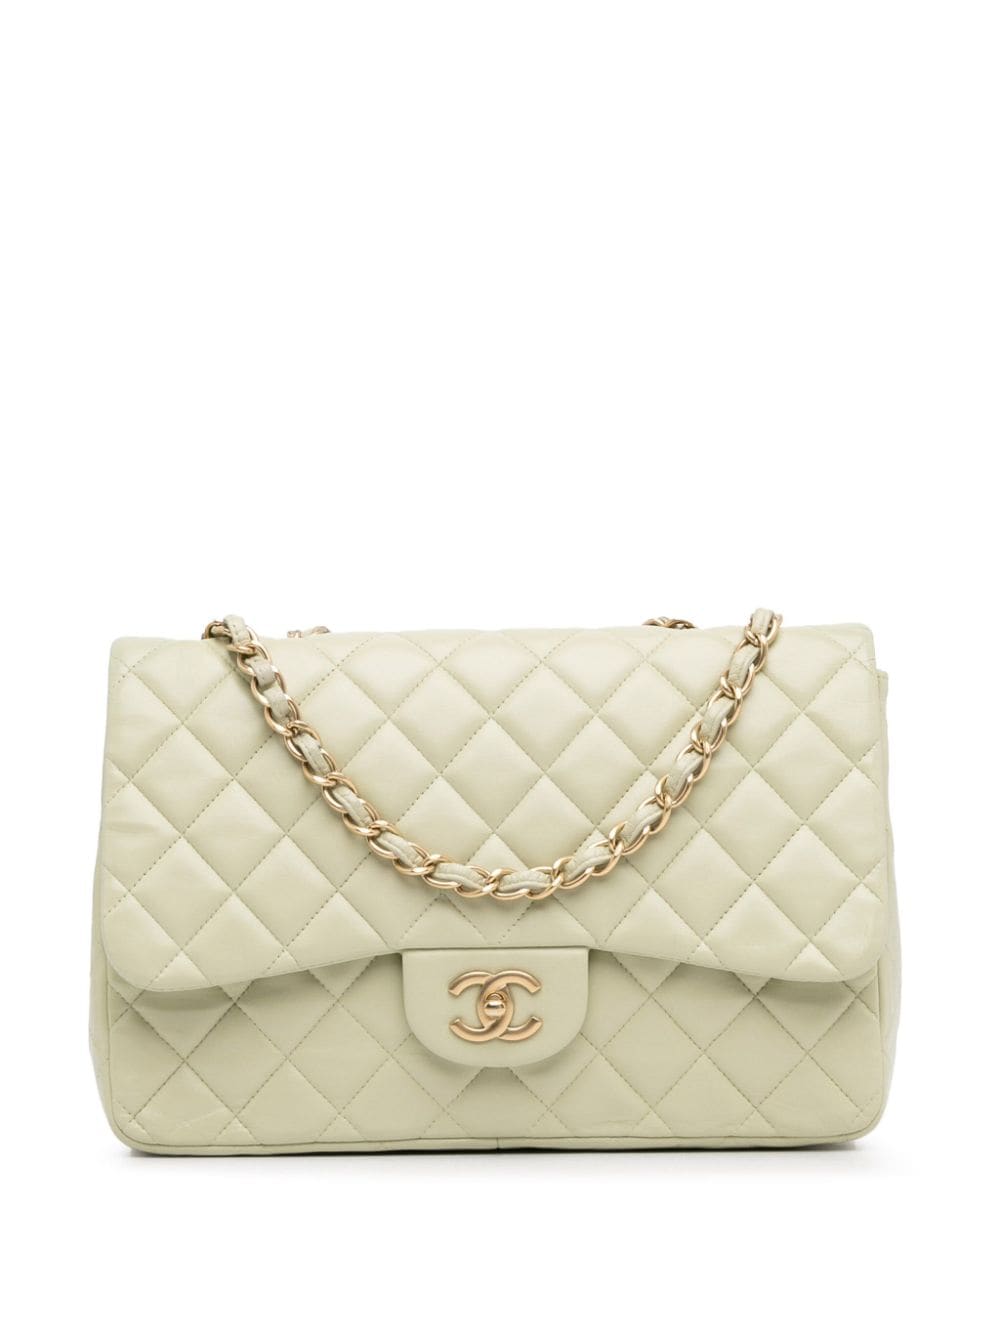 CHANEL Pre-Owned 2009-2010 Jumbo Classic Lambskin Single Flap shoulder bag - Green von CHANEL Pre-Owned